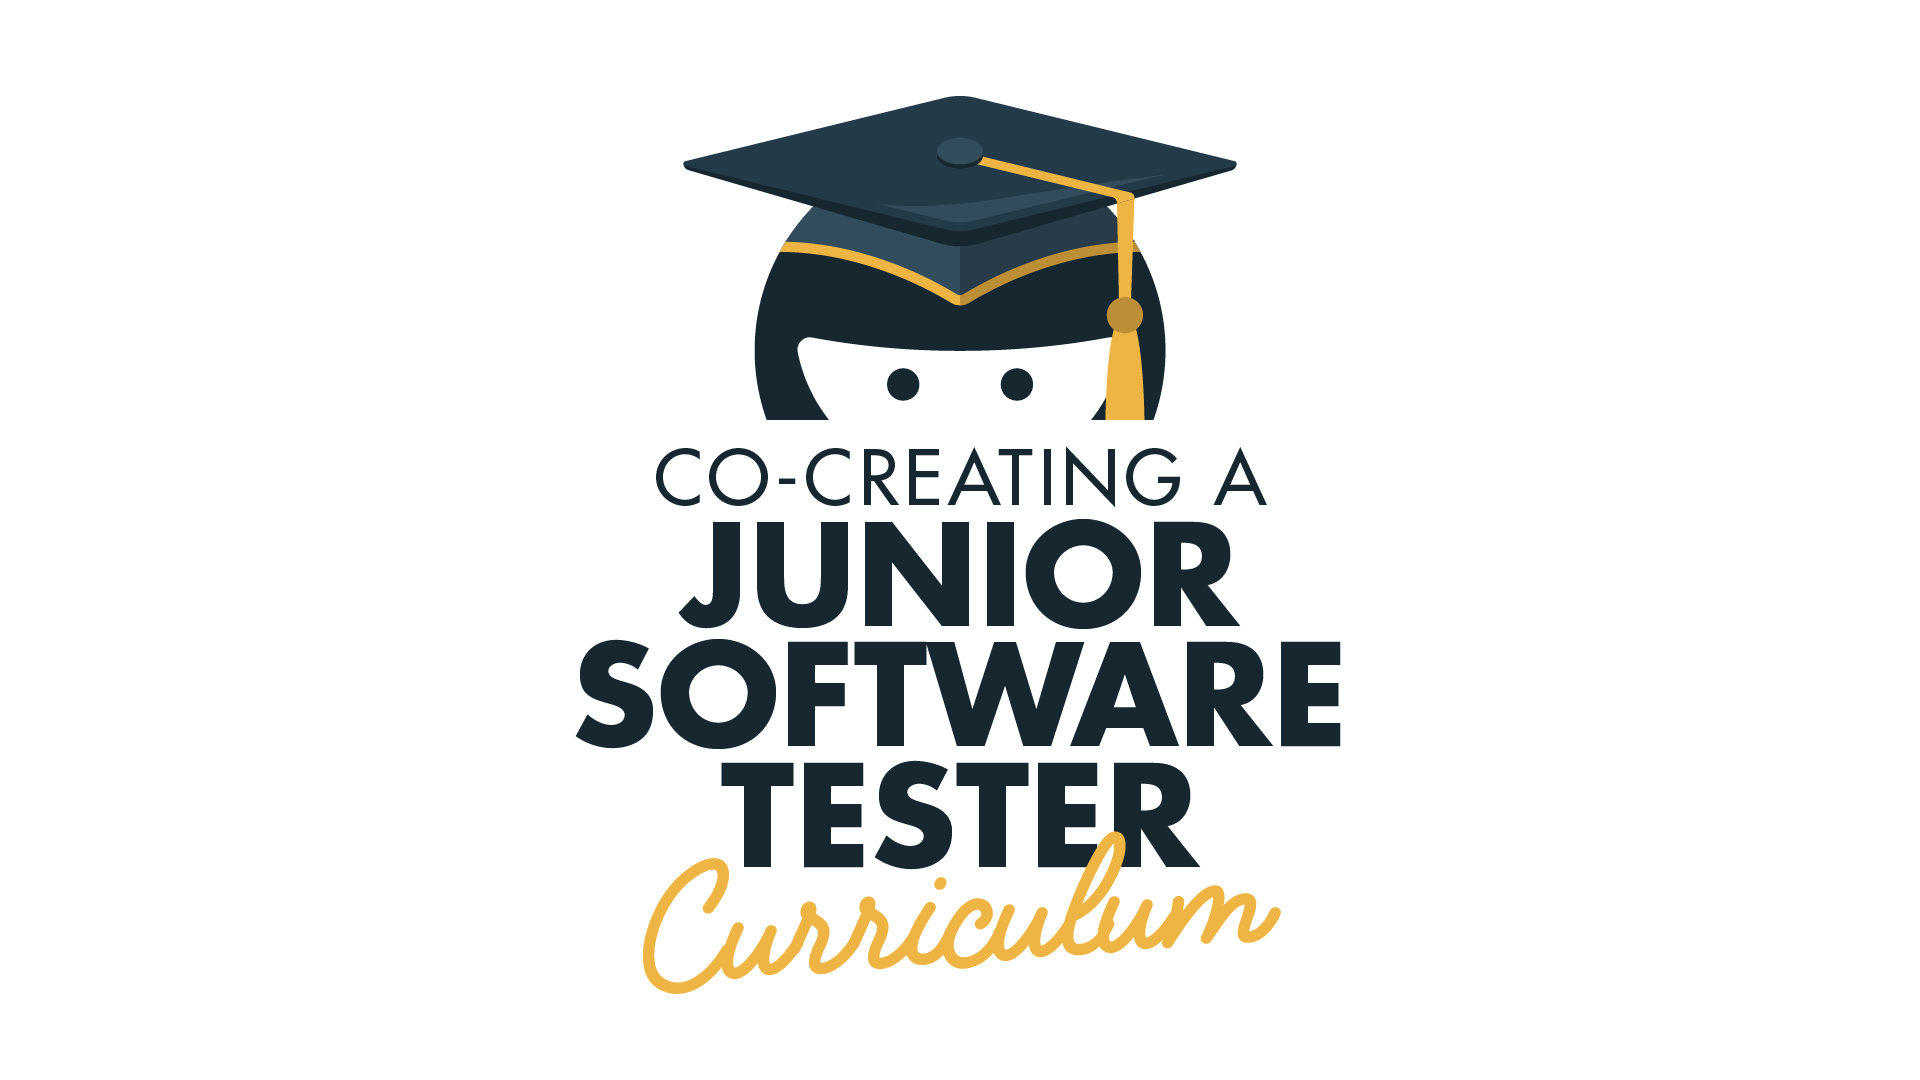 Here We Go Again! Let’s Co-create Another Open-Source Testing Curriculum!